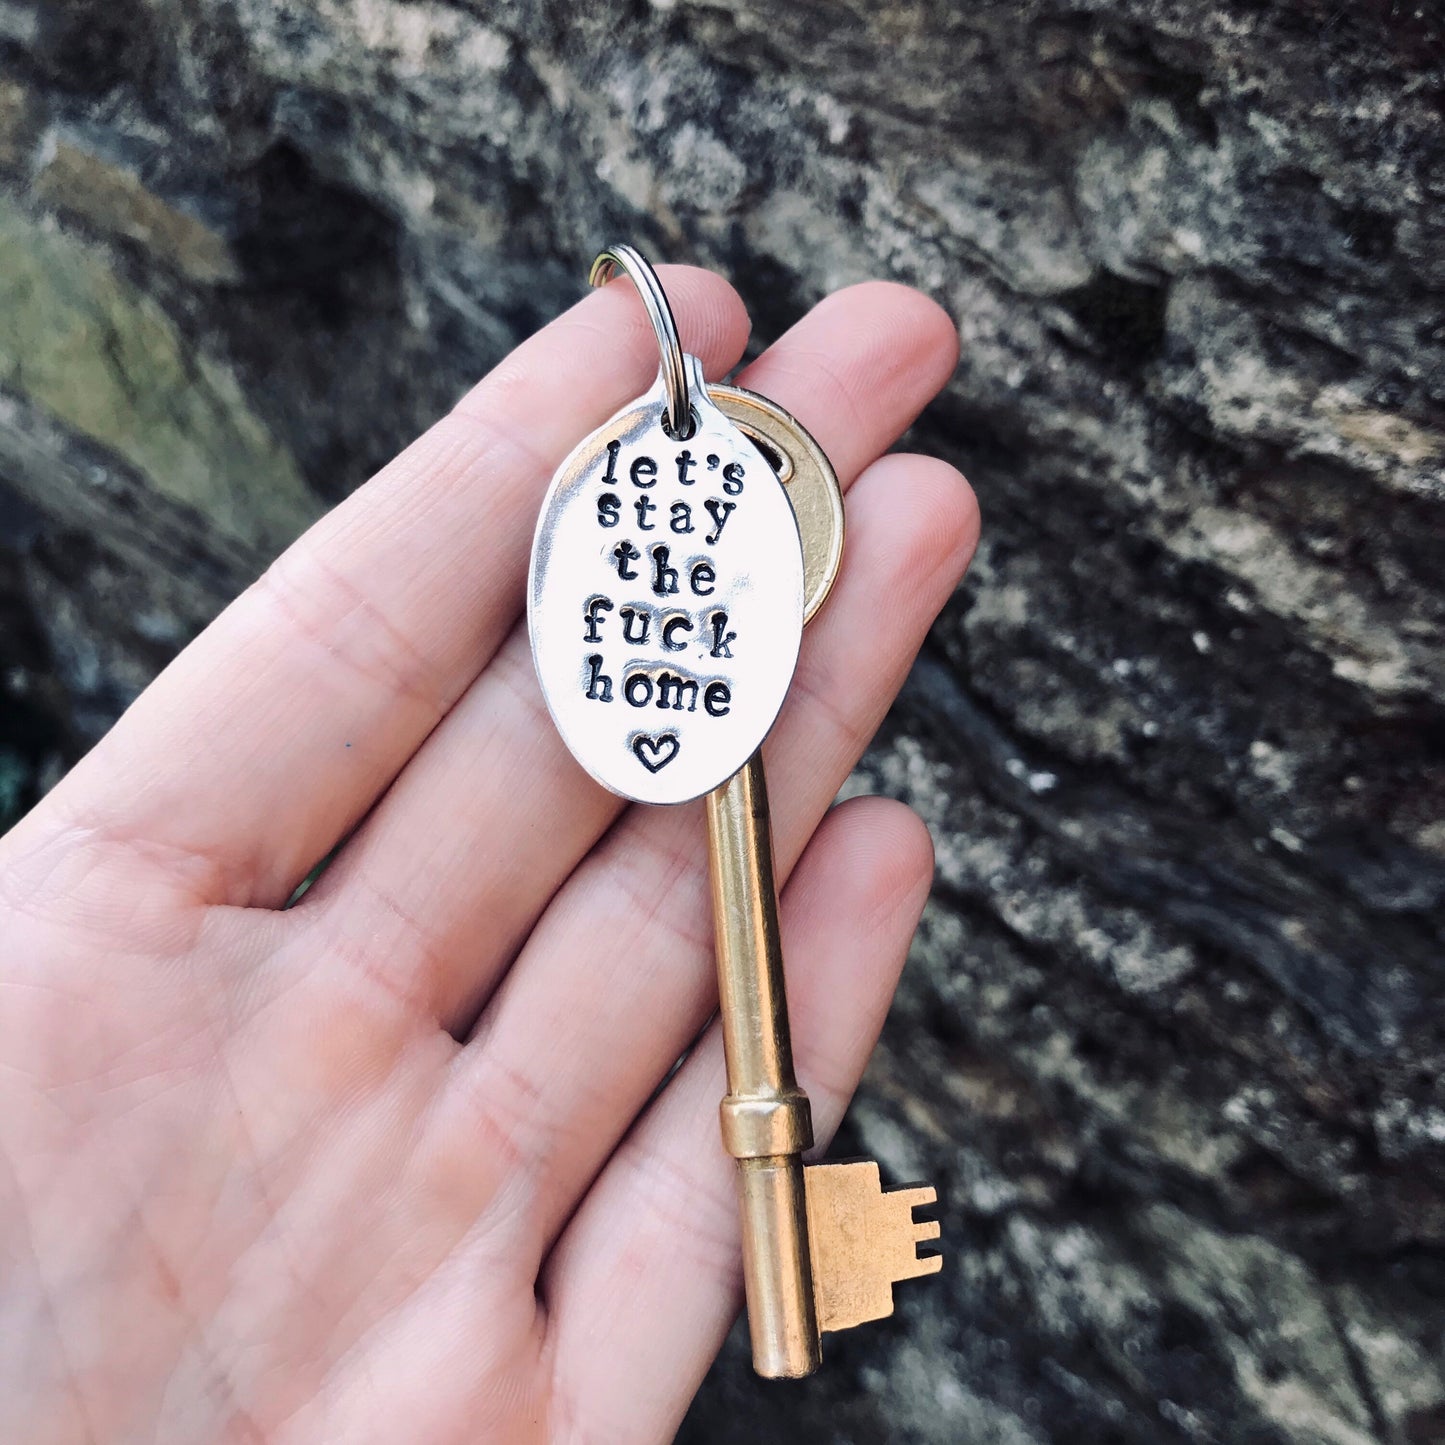 Let’s Stay the Fuck Home - Vintage Spoon Keyring